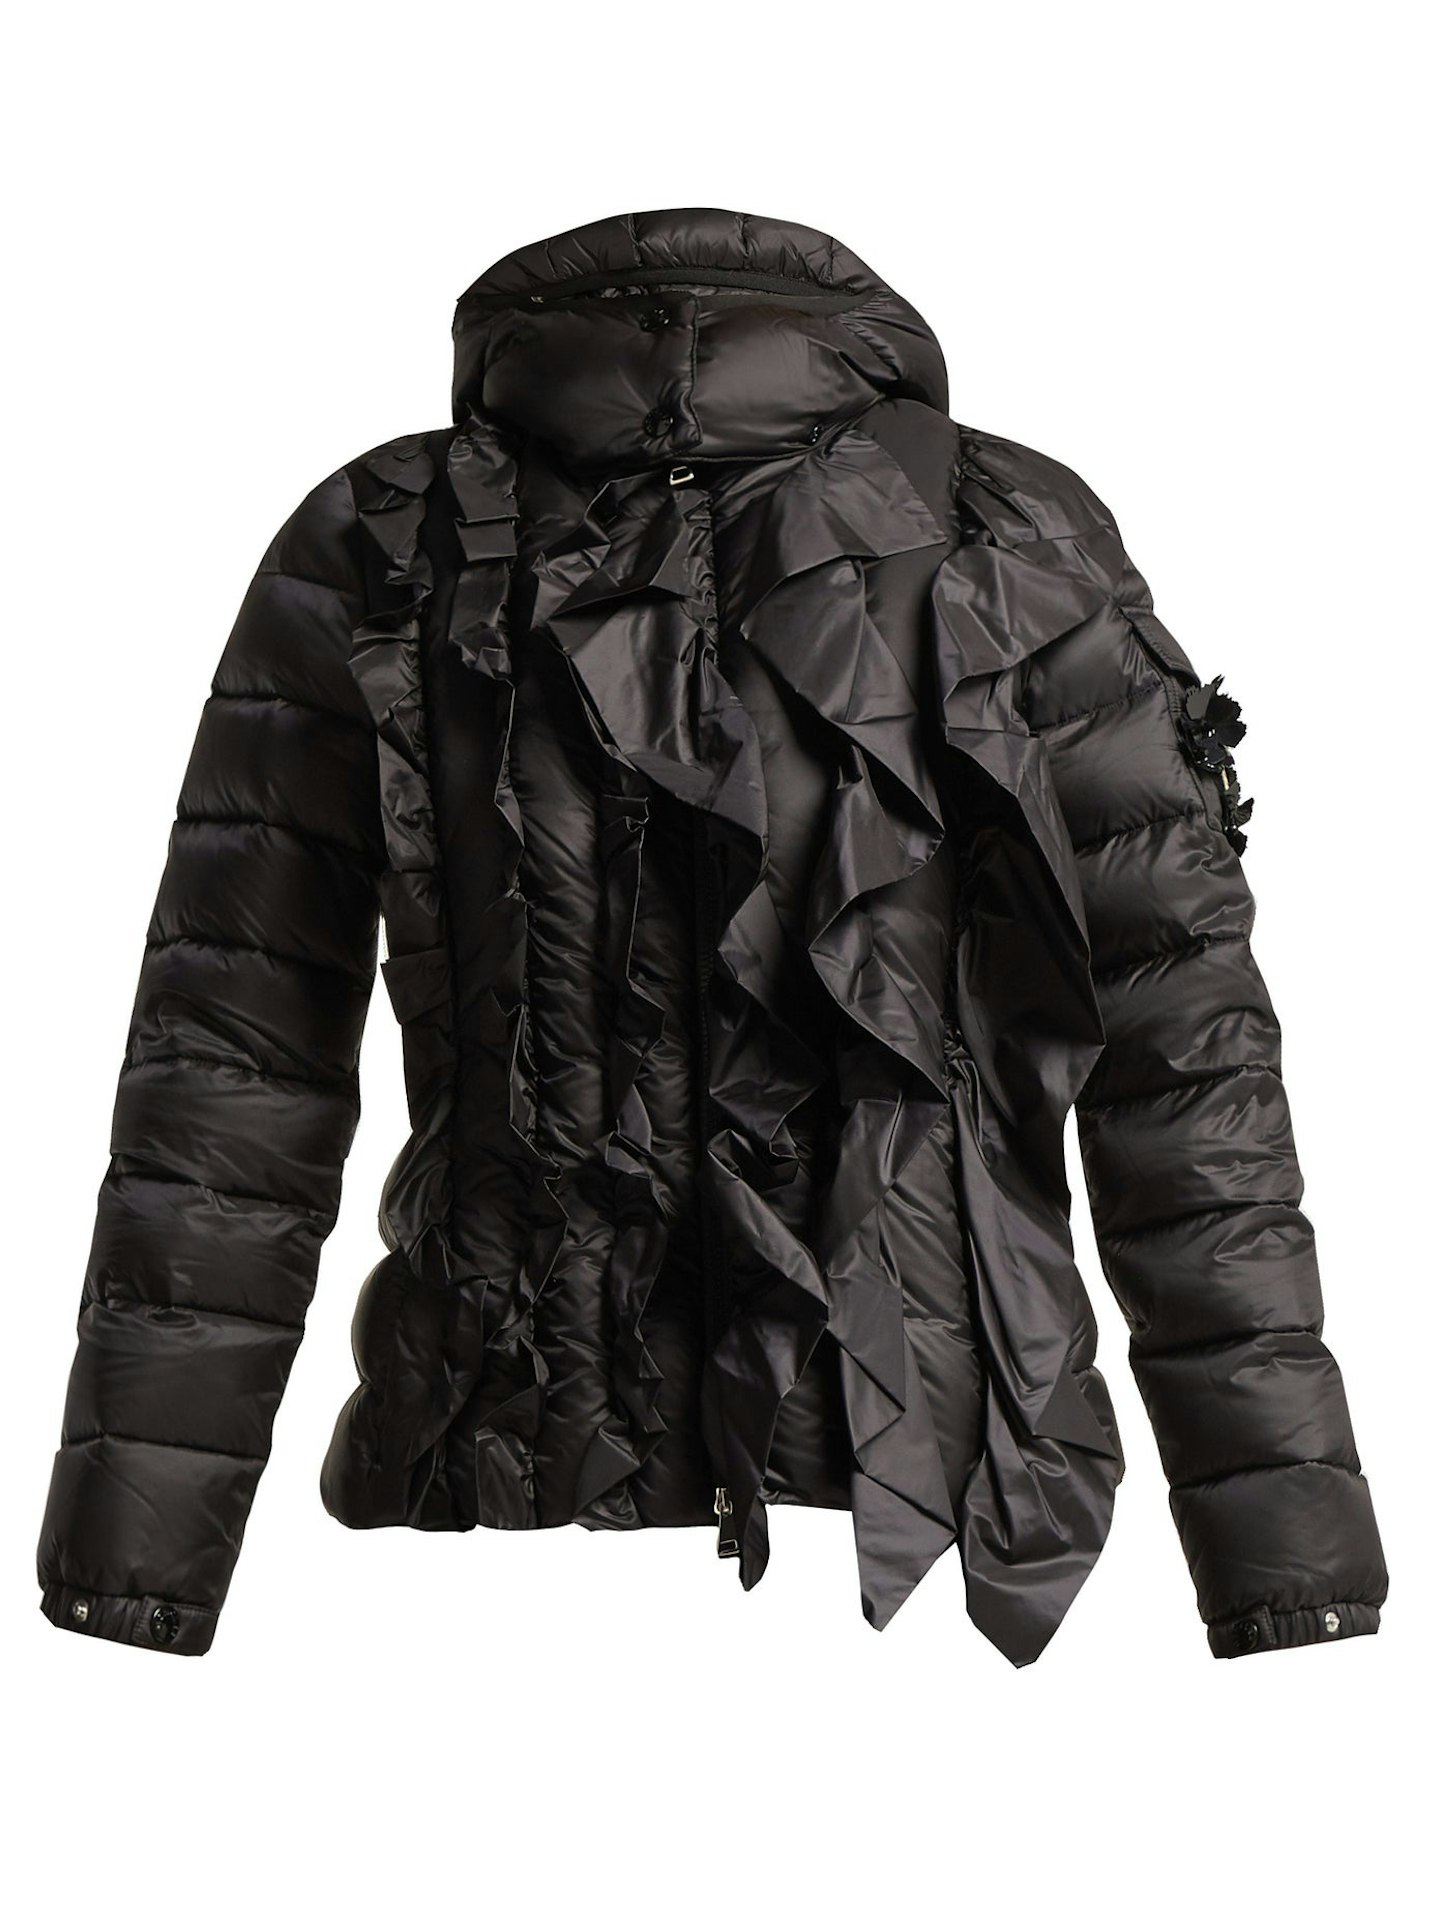 4 Moncer Simone Rocha, Ruffled Quilted Jacket, £1,250